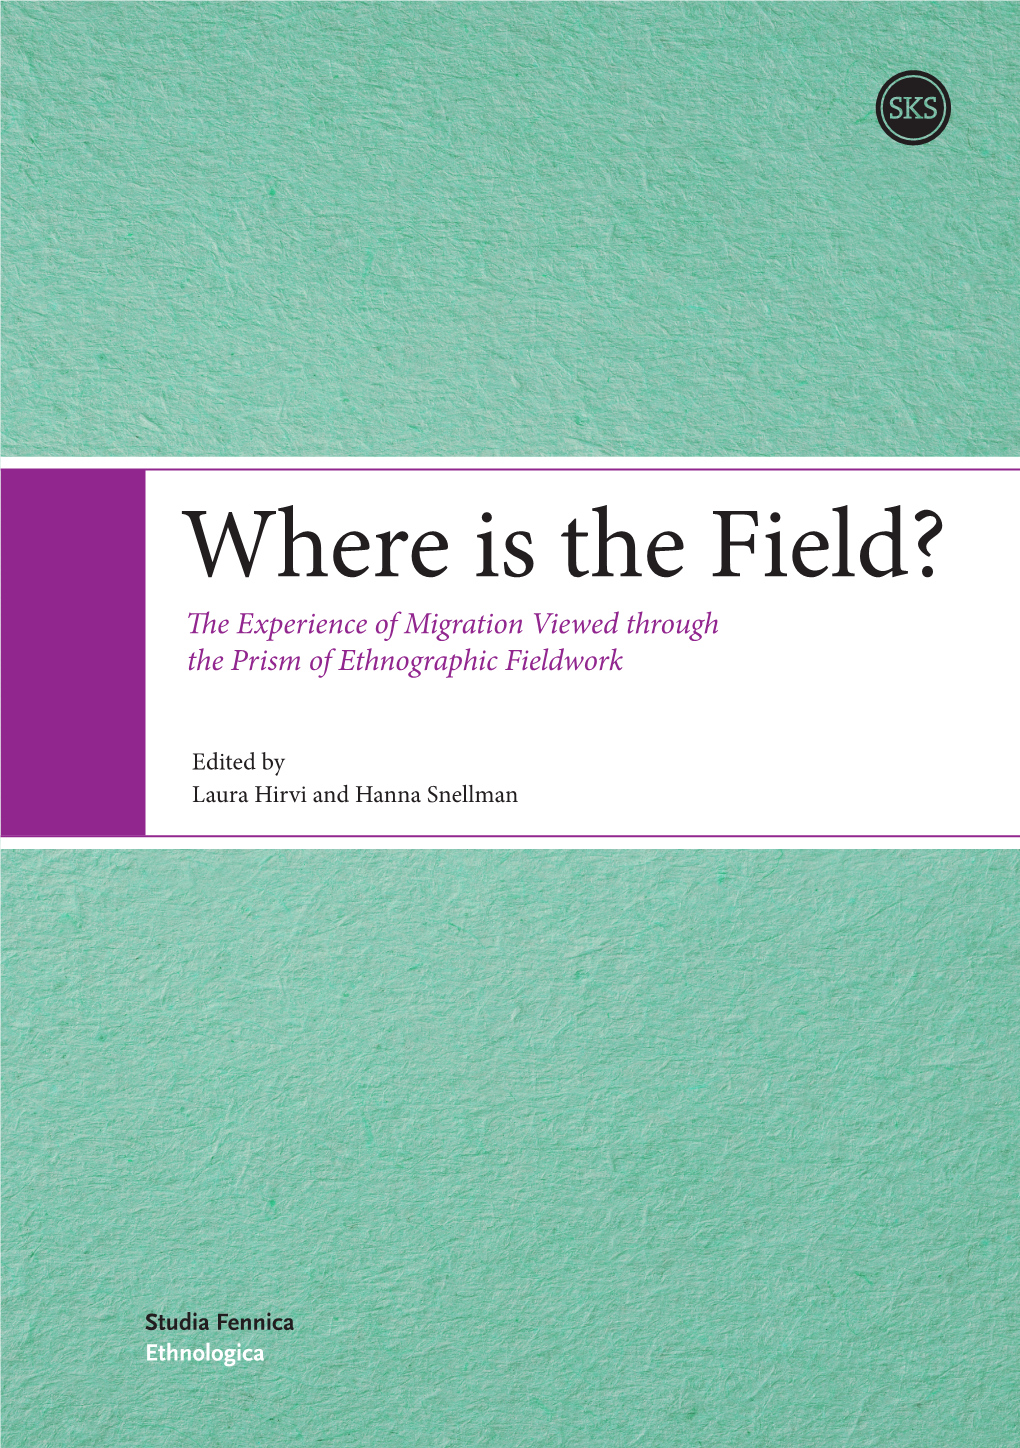 Where Is the Field? the Experience of Migration Viewed Through the Prism of Ethnographic Fieldwork